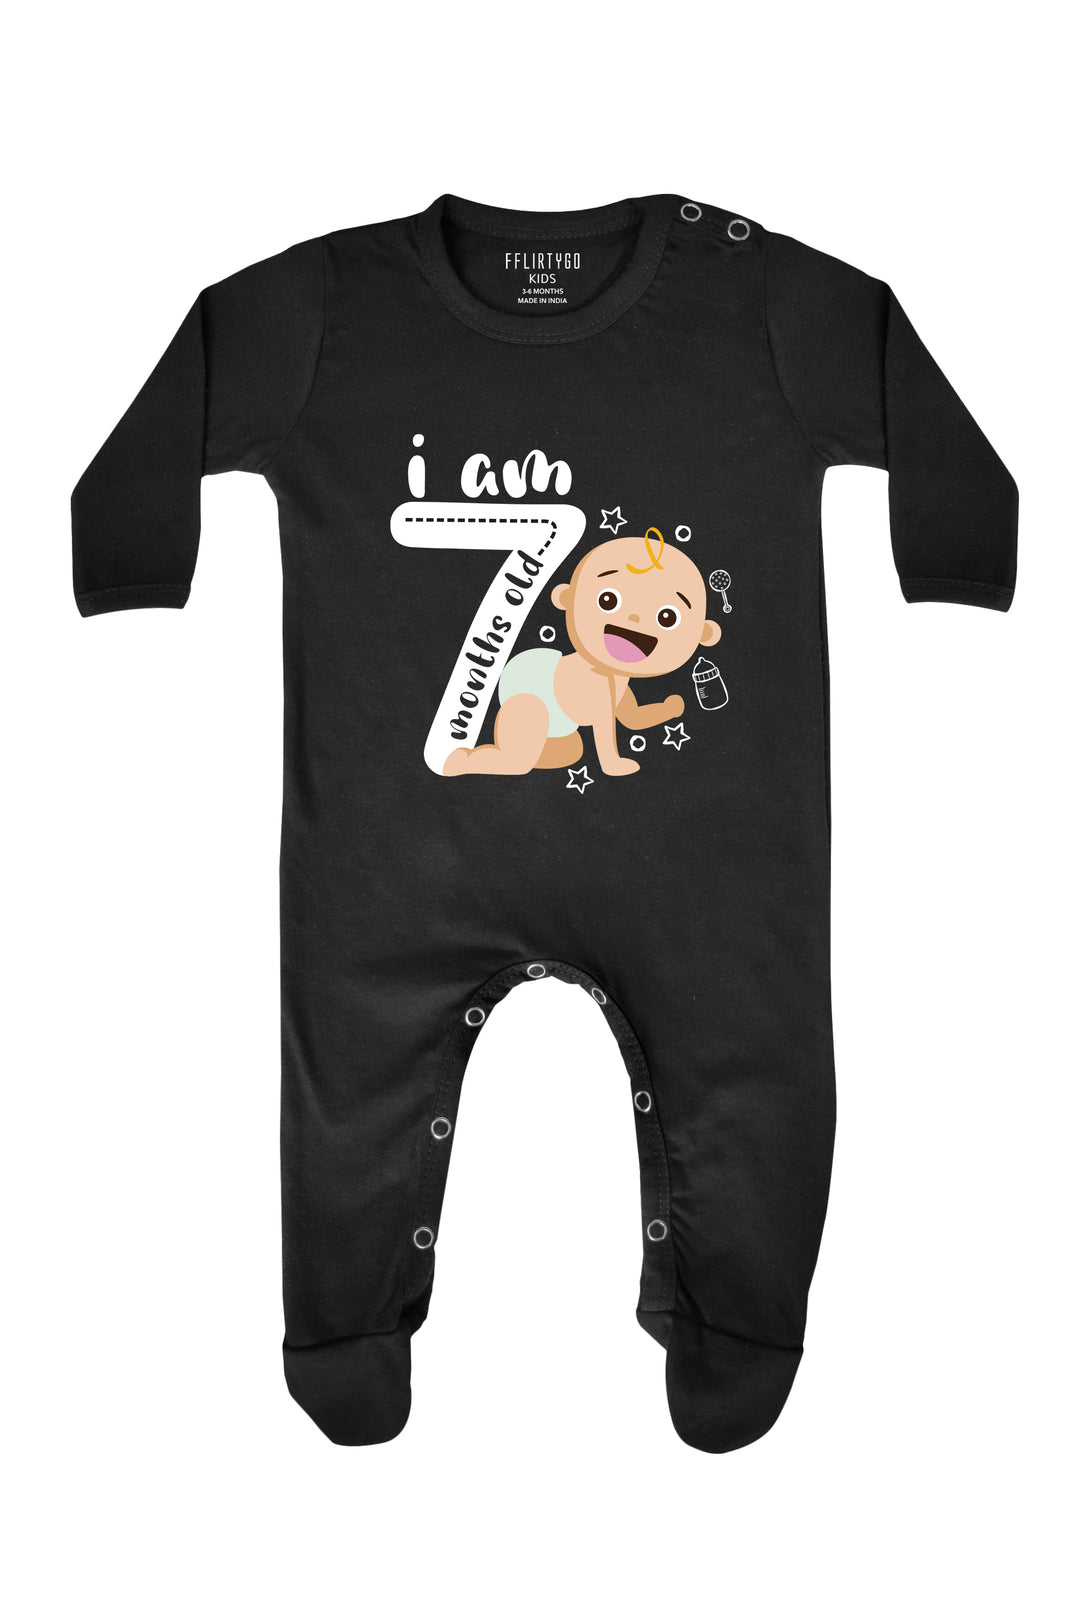 I am 7 months old Baby Romper | Onesies